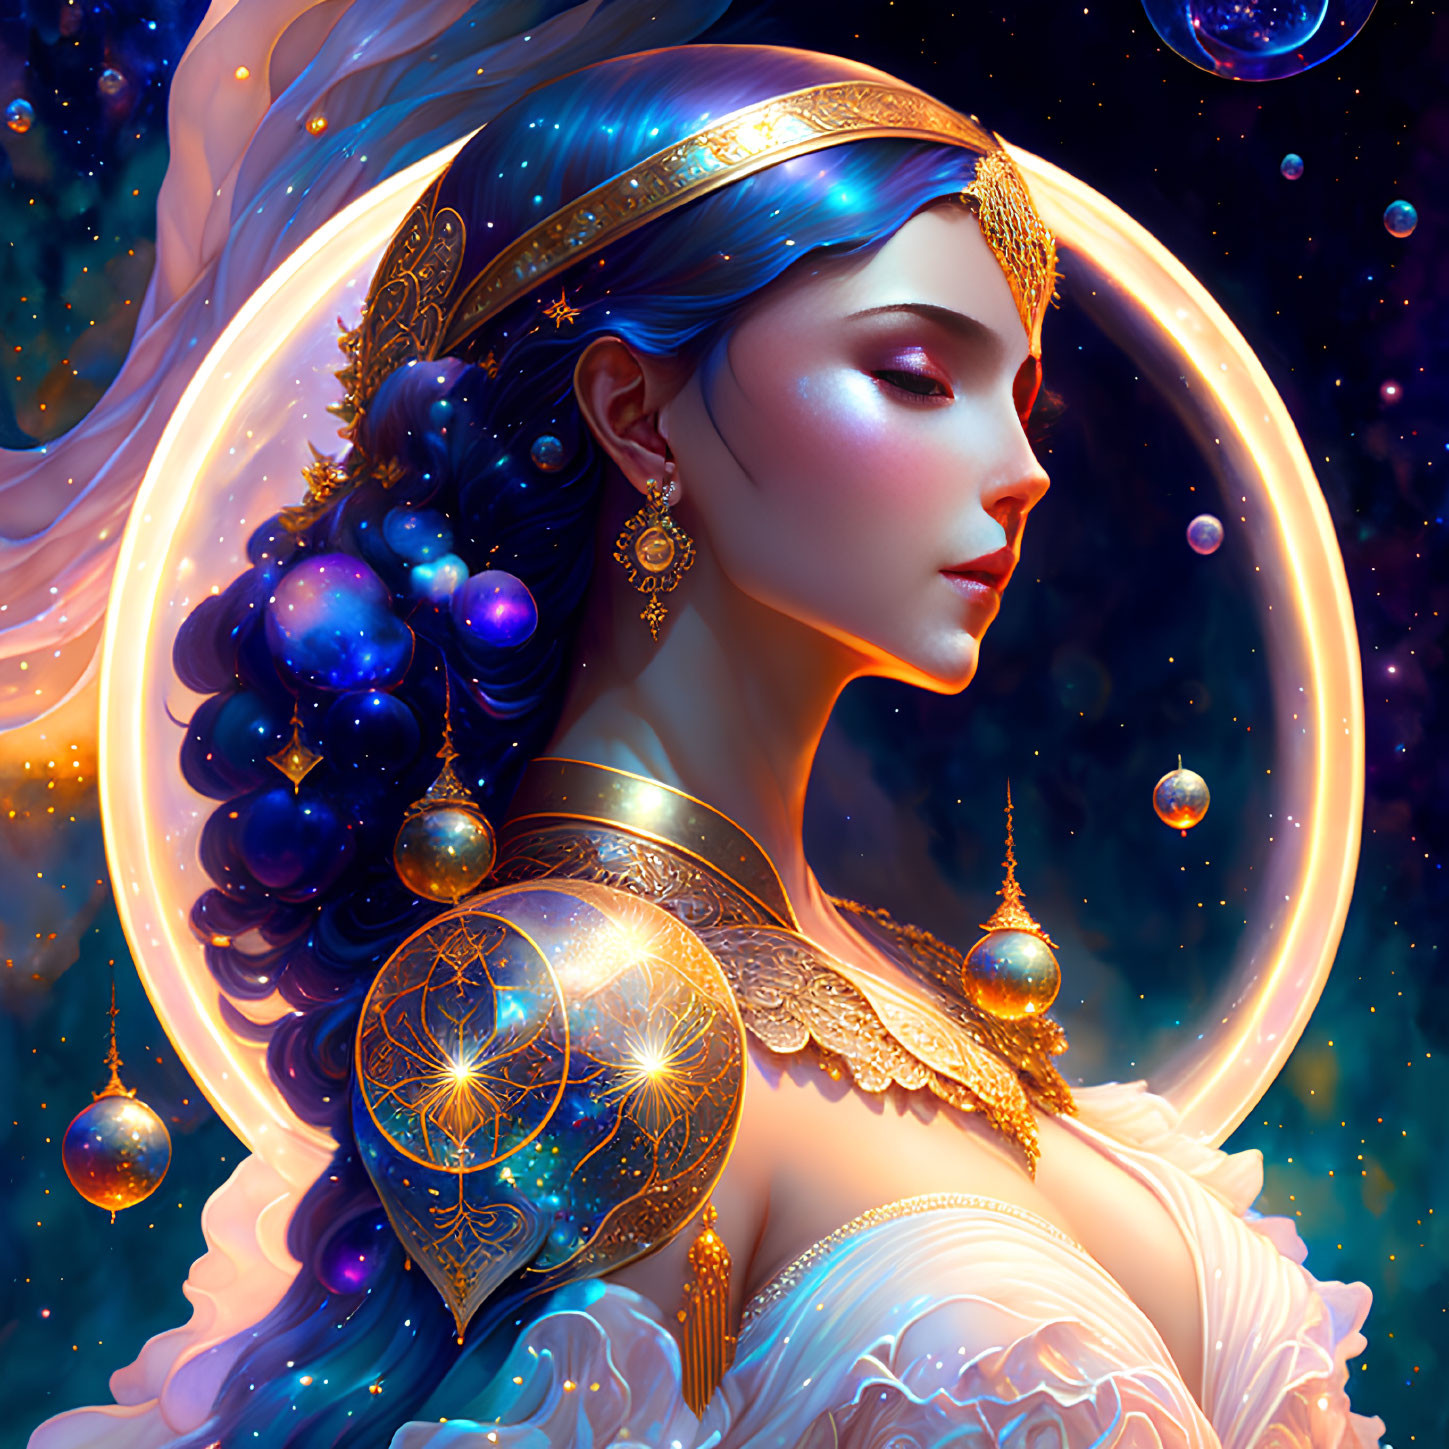 Ethereal illustration of woman with blue hair, celestial jewelry, glowing halo surrounded by stars and planets